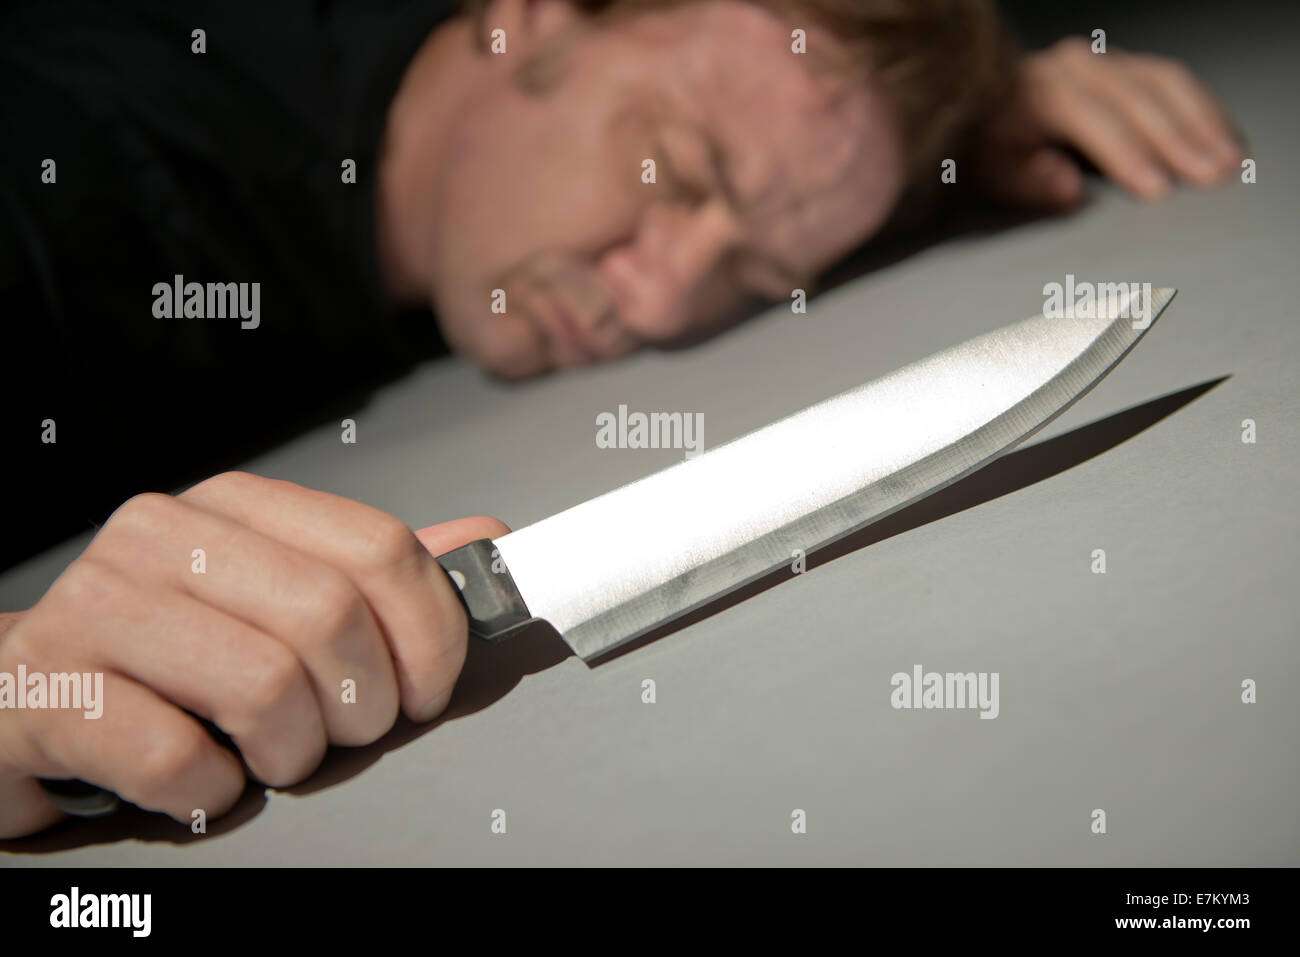 Angled view of a man, lying face down on the floor, holding a deadly kitchen knife. Stock Photo